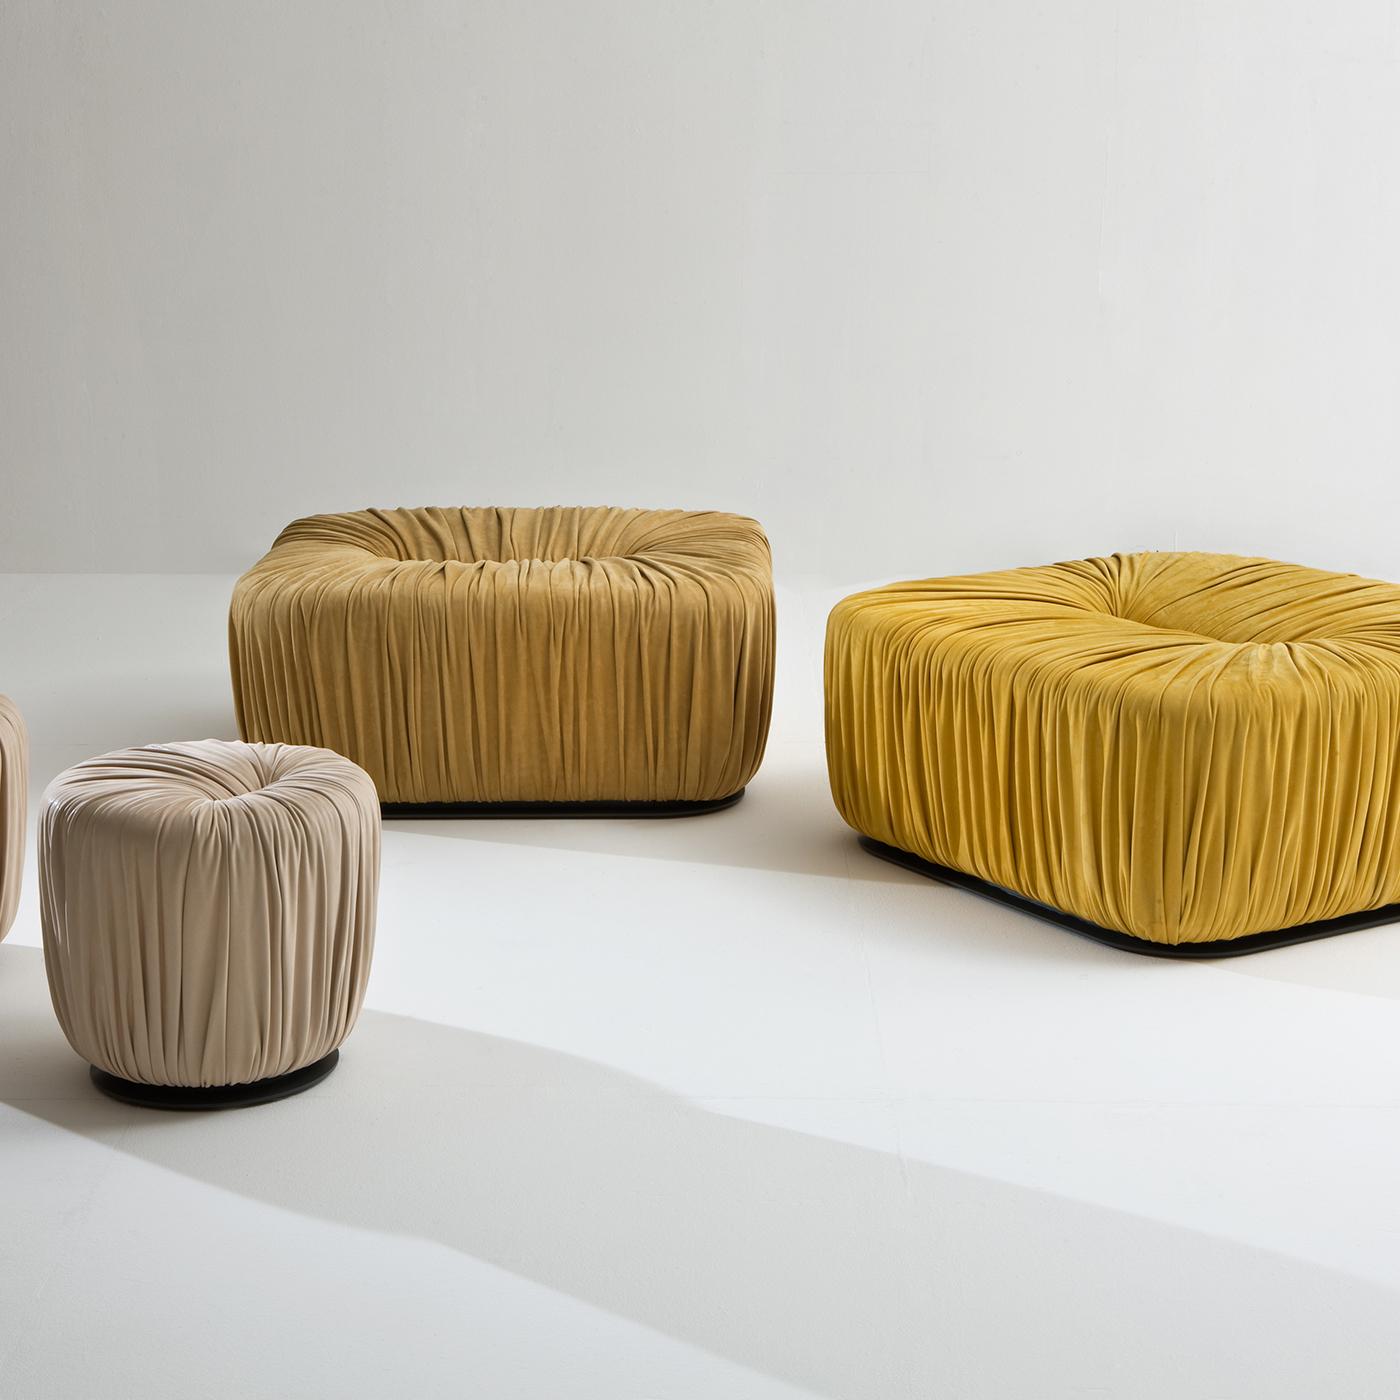 This luxurious rectangular ottoman is upholstered in soft yellow nubuck leather and is also available in several other shapes and sizes. The Drapé Collection is a set of upholstered poufs covered in leather or velvet with a base in metal, whose